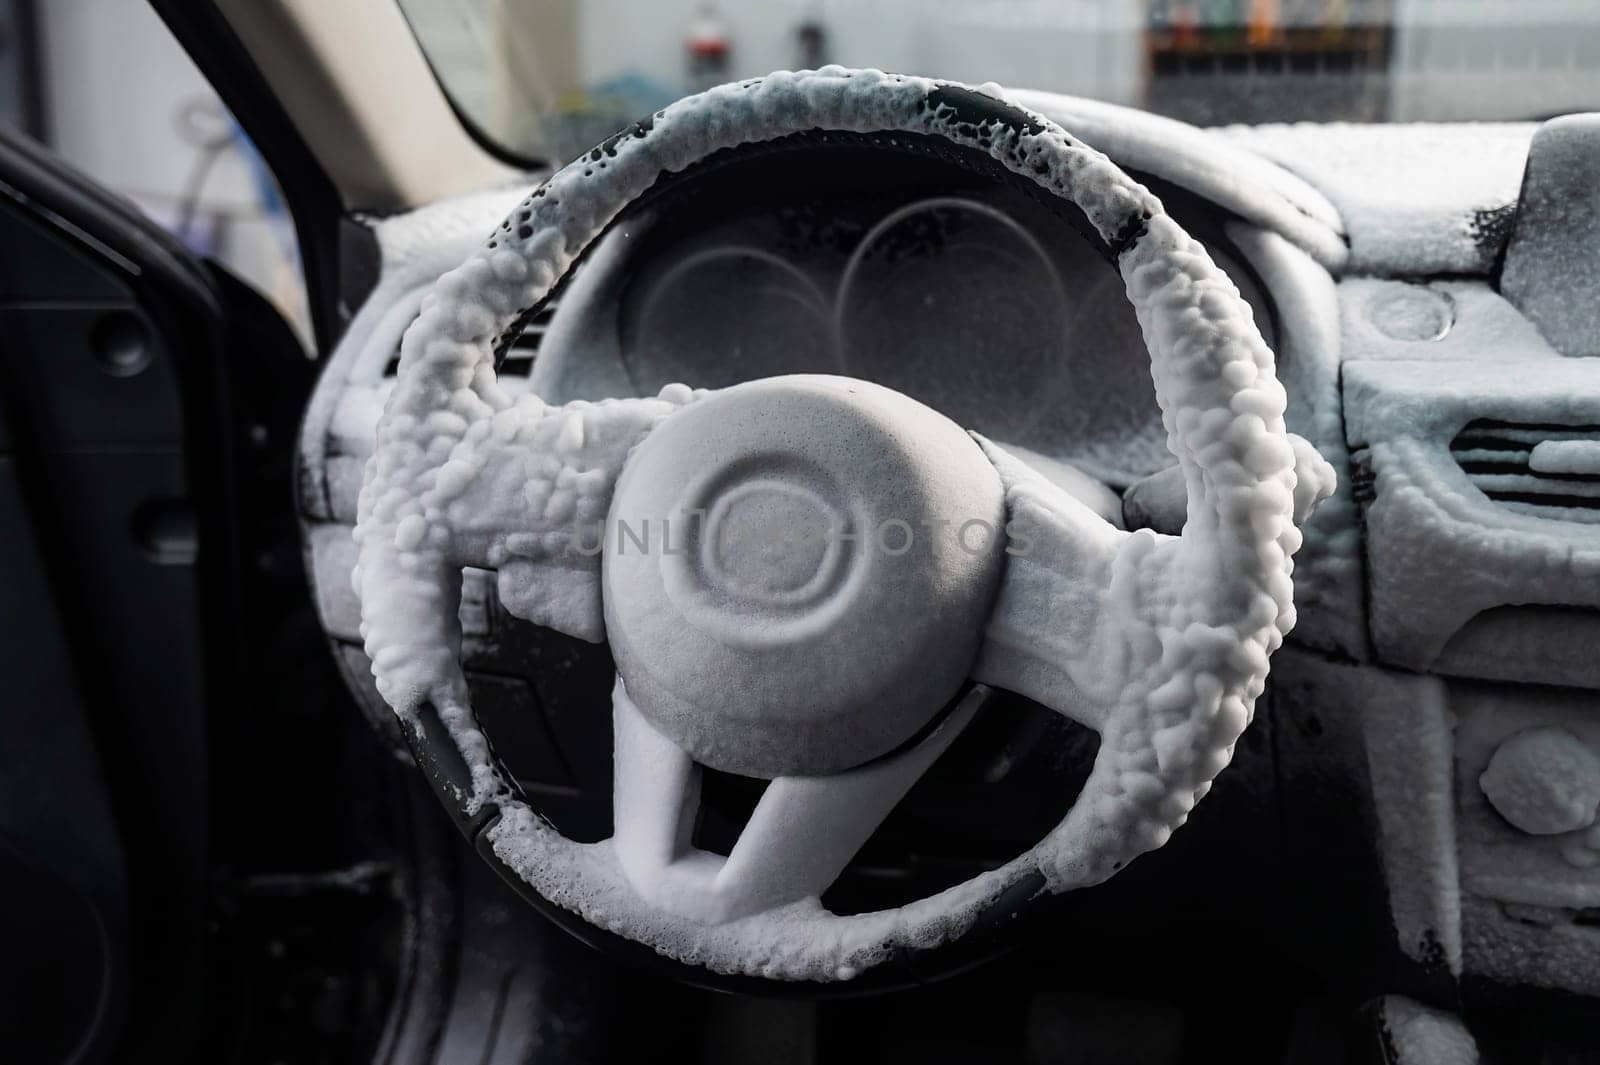 Car interior in a layer of cleaning foam. by mrwed54